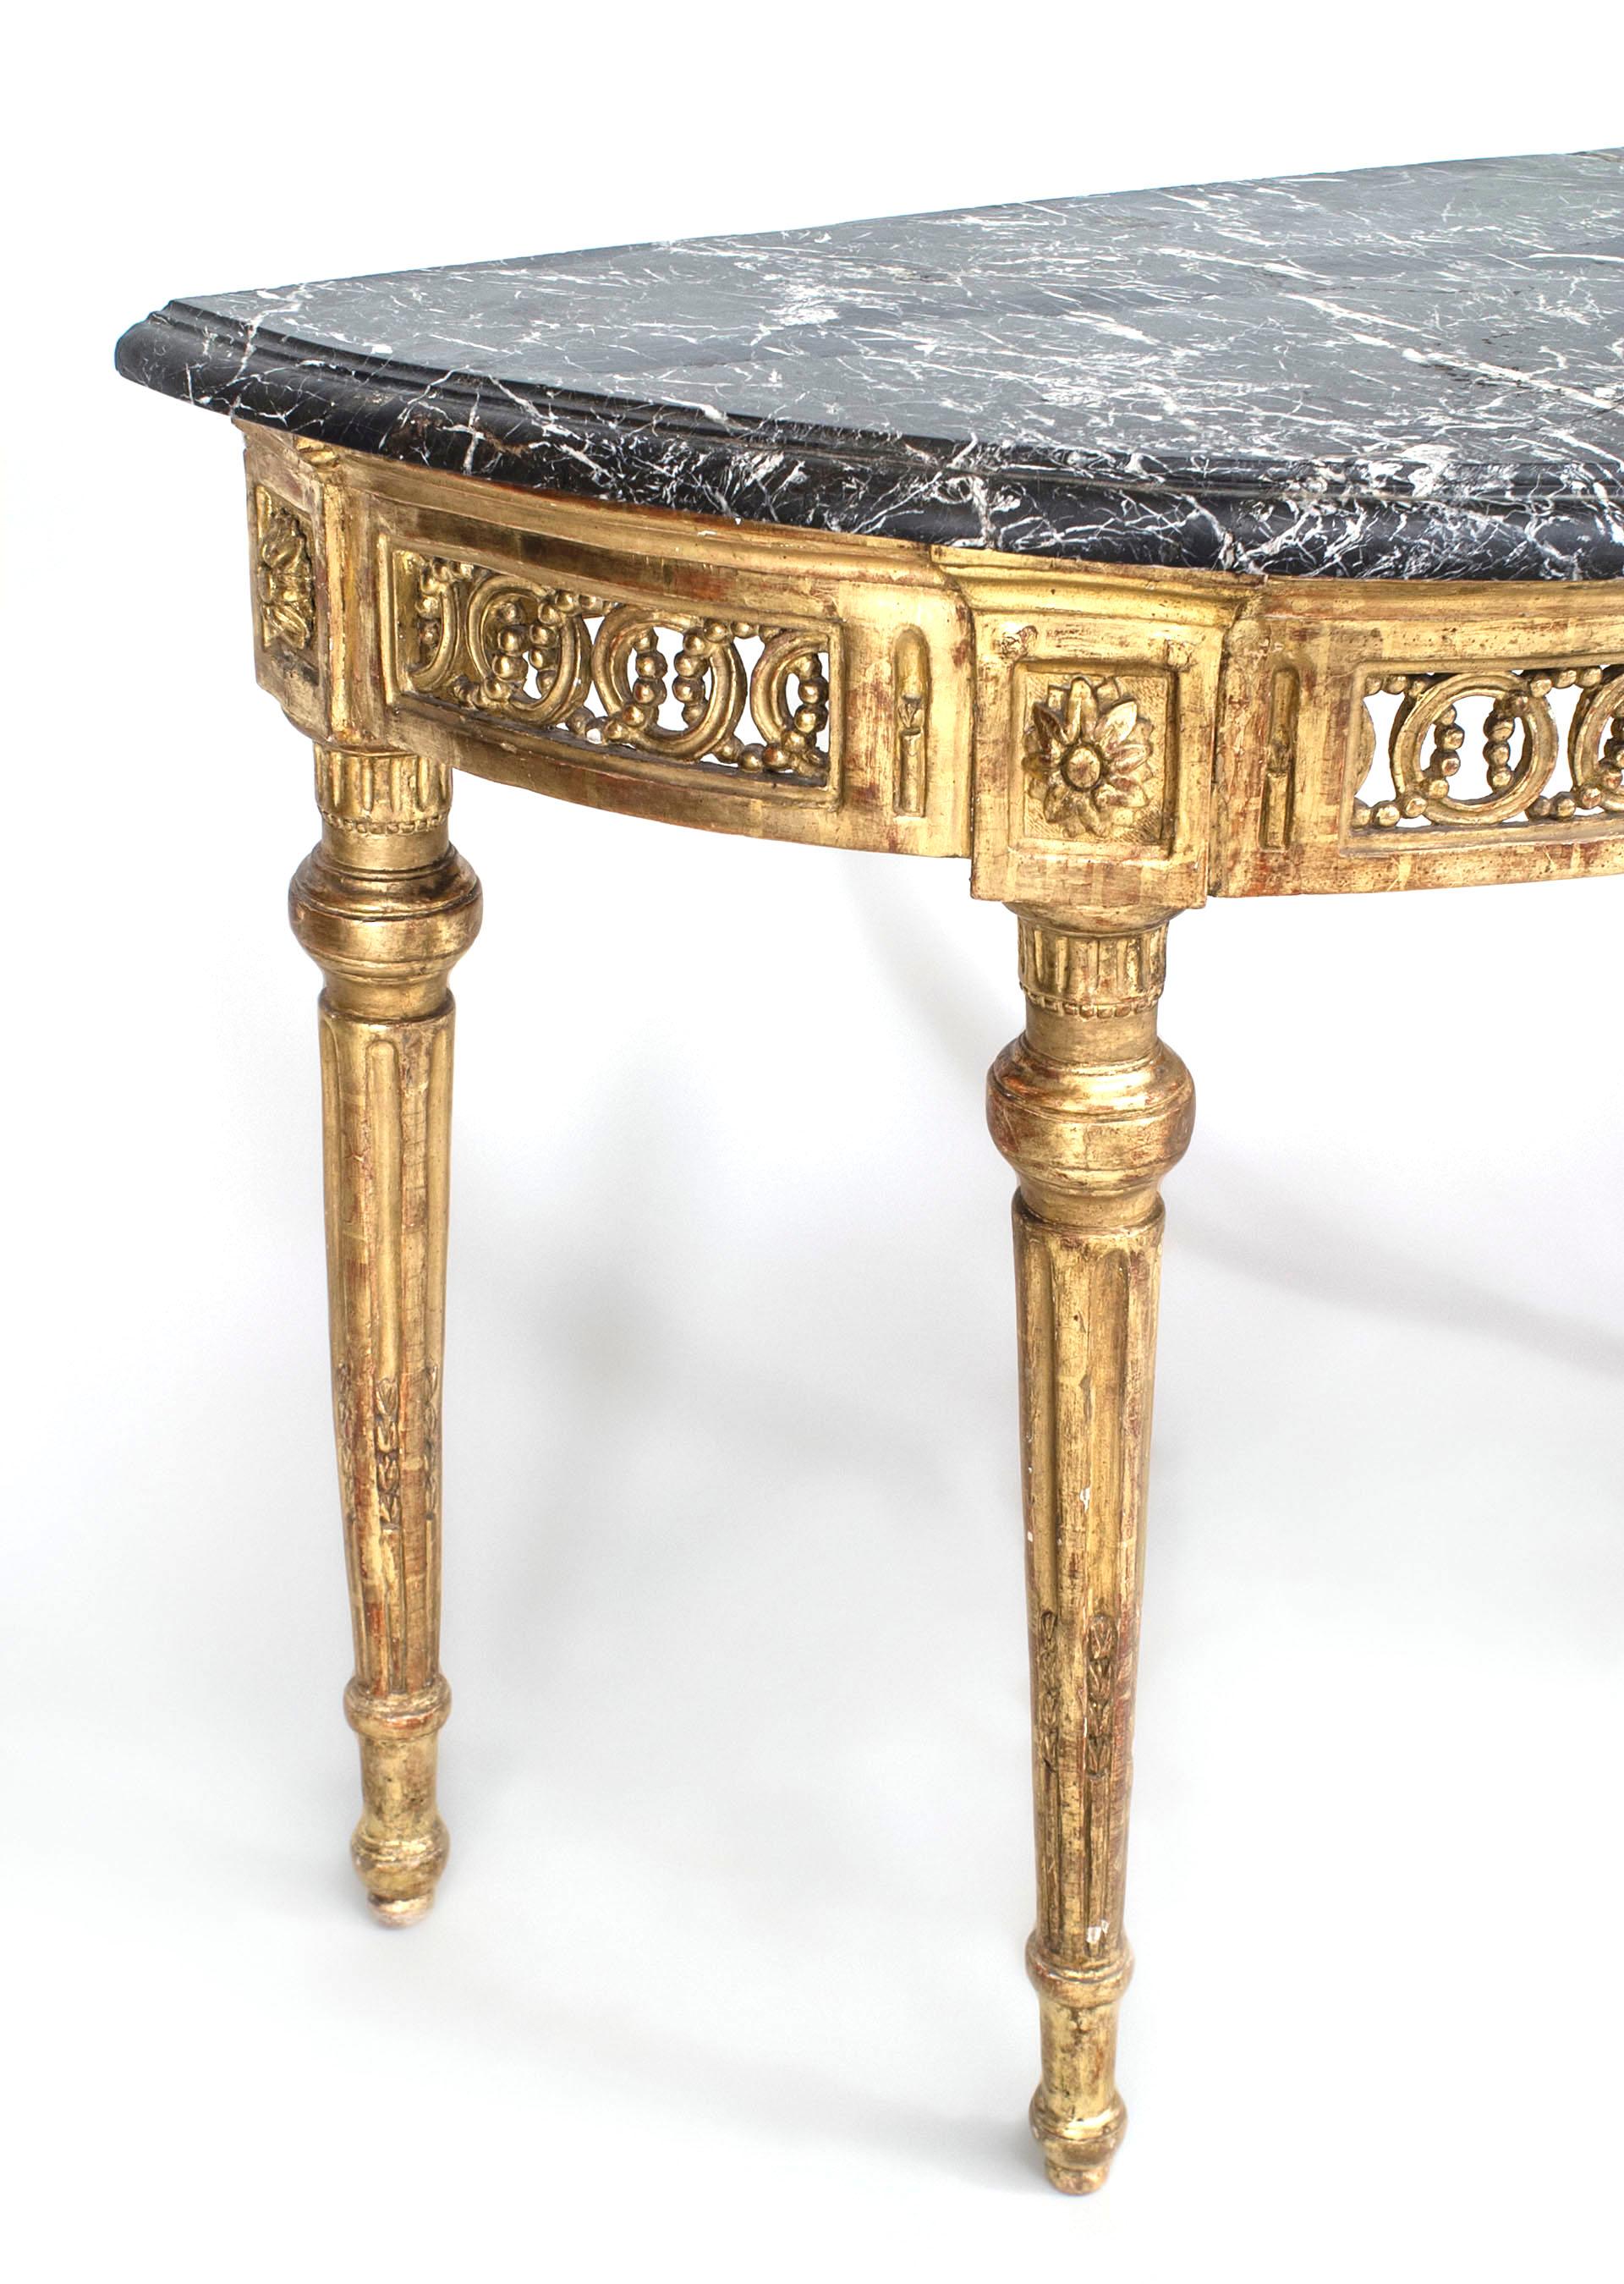 Italian Neo-classic-style (18th Century) gilt demilune shaped console table with fluted tapered legs supporting a filigree apron with a fluted center panel under a black marble top.
